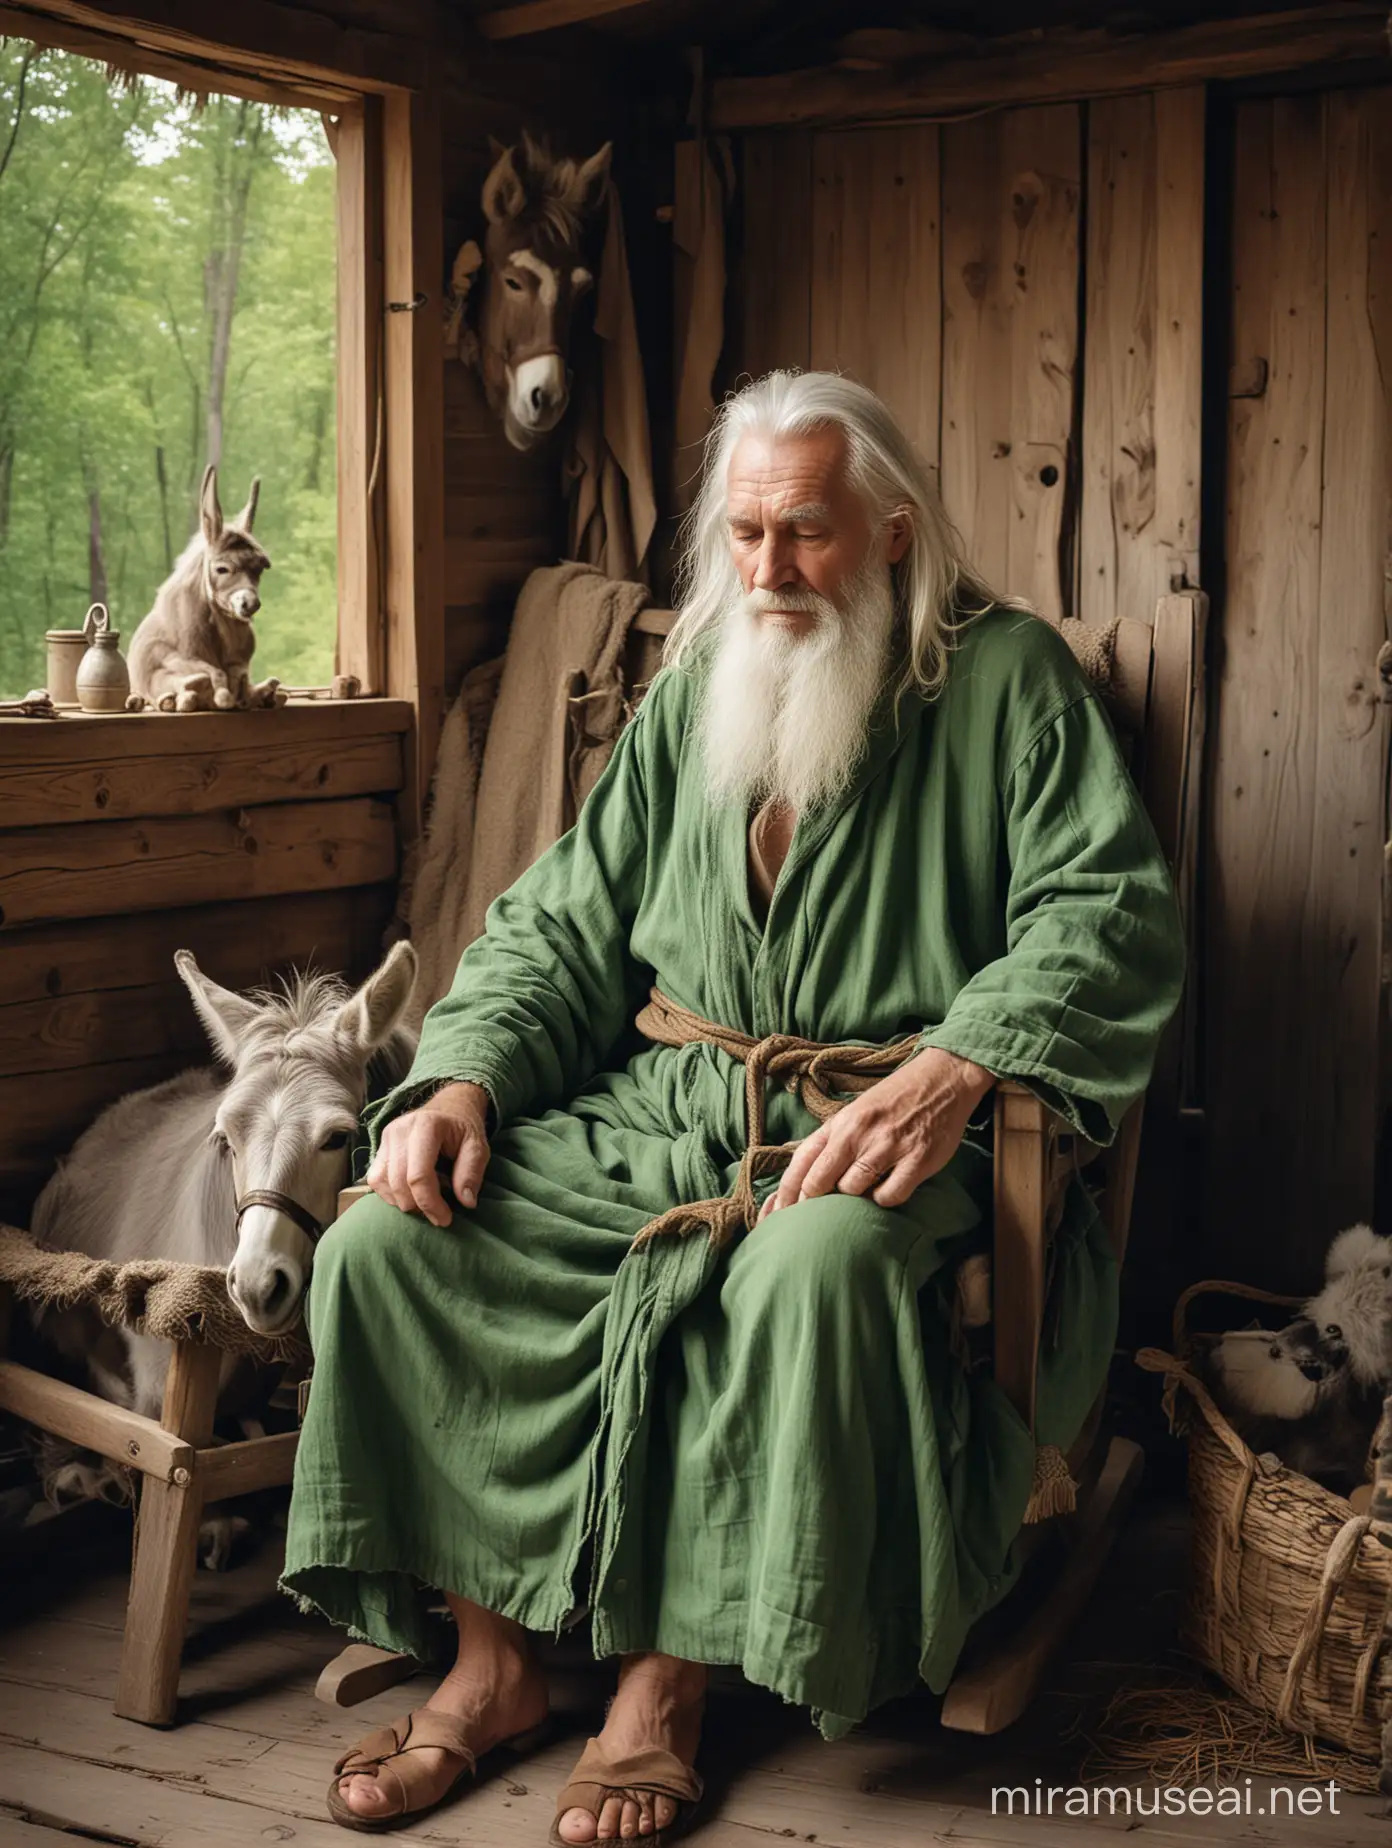 old hermit wrinkle man, with long white hair, short beard, wearing green ragged robe and clothes, sleeping, on rocking chair, with his pet donkey, in a cabin, in the forest.